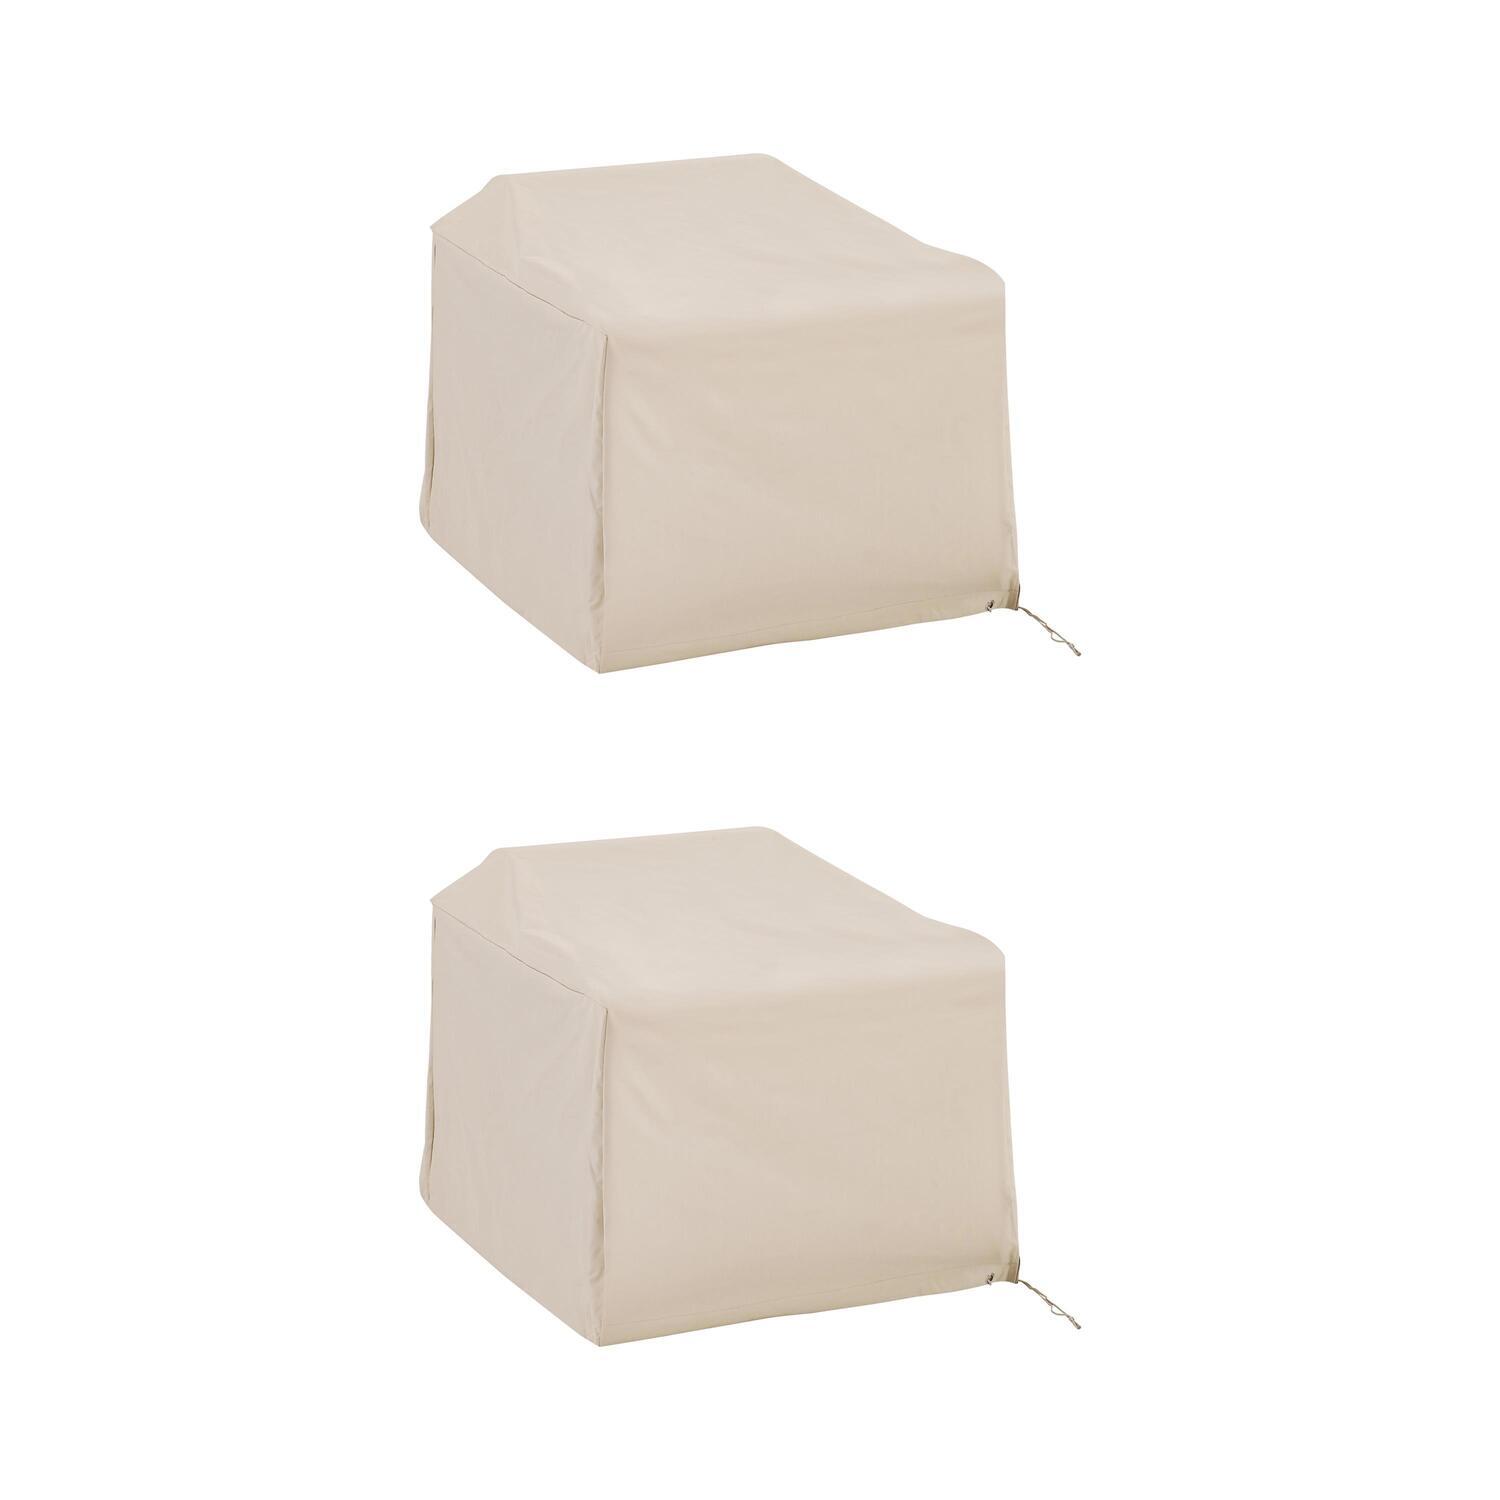 Crosley Furniture Outdoor Vinyl Chair Cover in Tan (Set of 2) - image 1 of 8